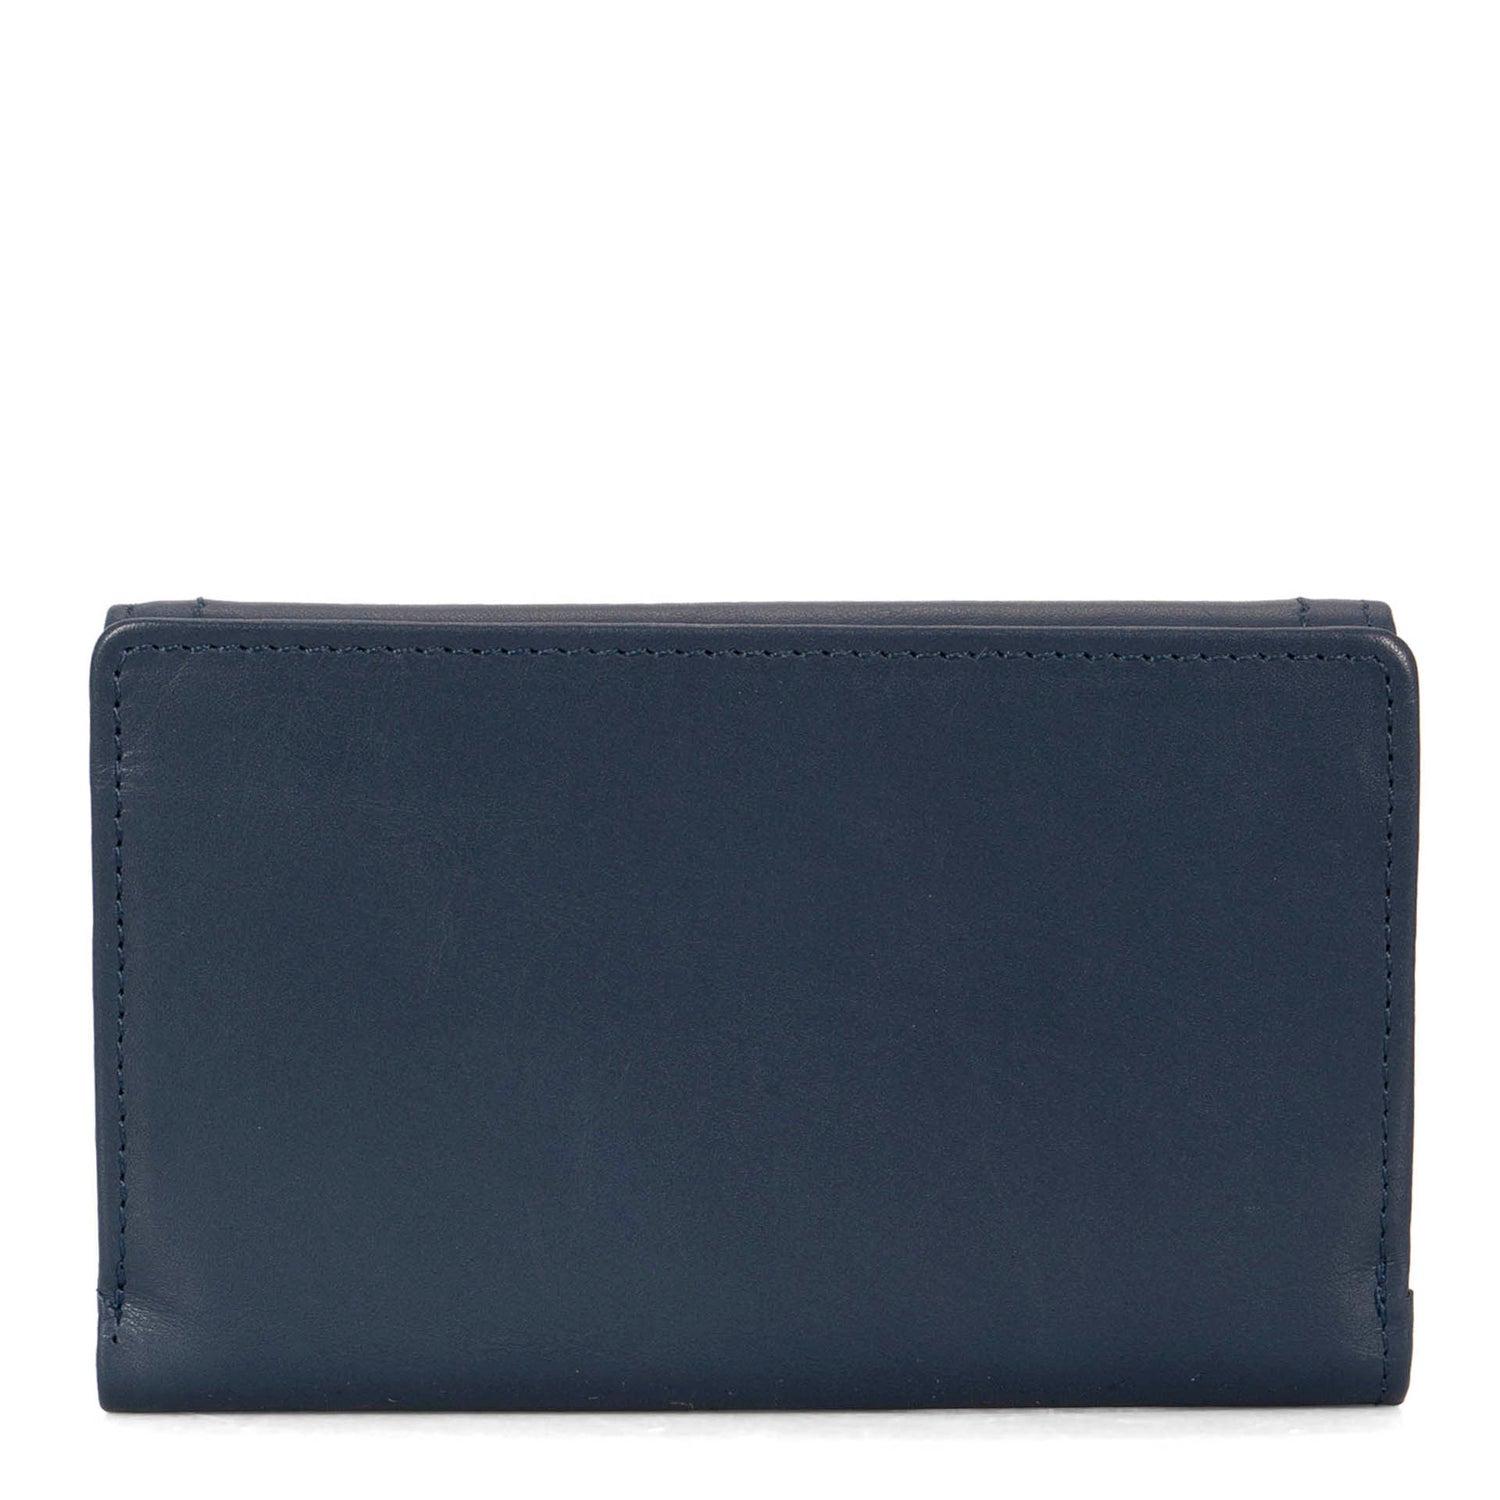 Back side of a navy flap wallet for women called Kara designed by Tracker showing its soft leather.